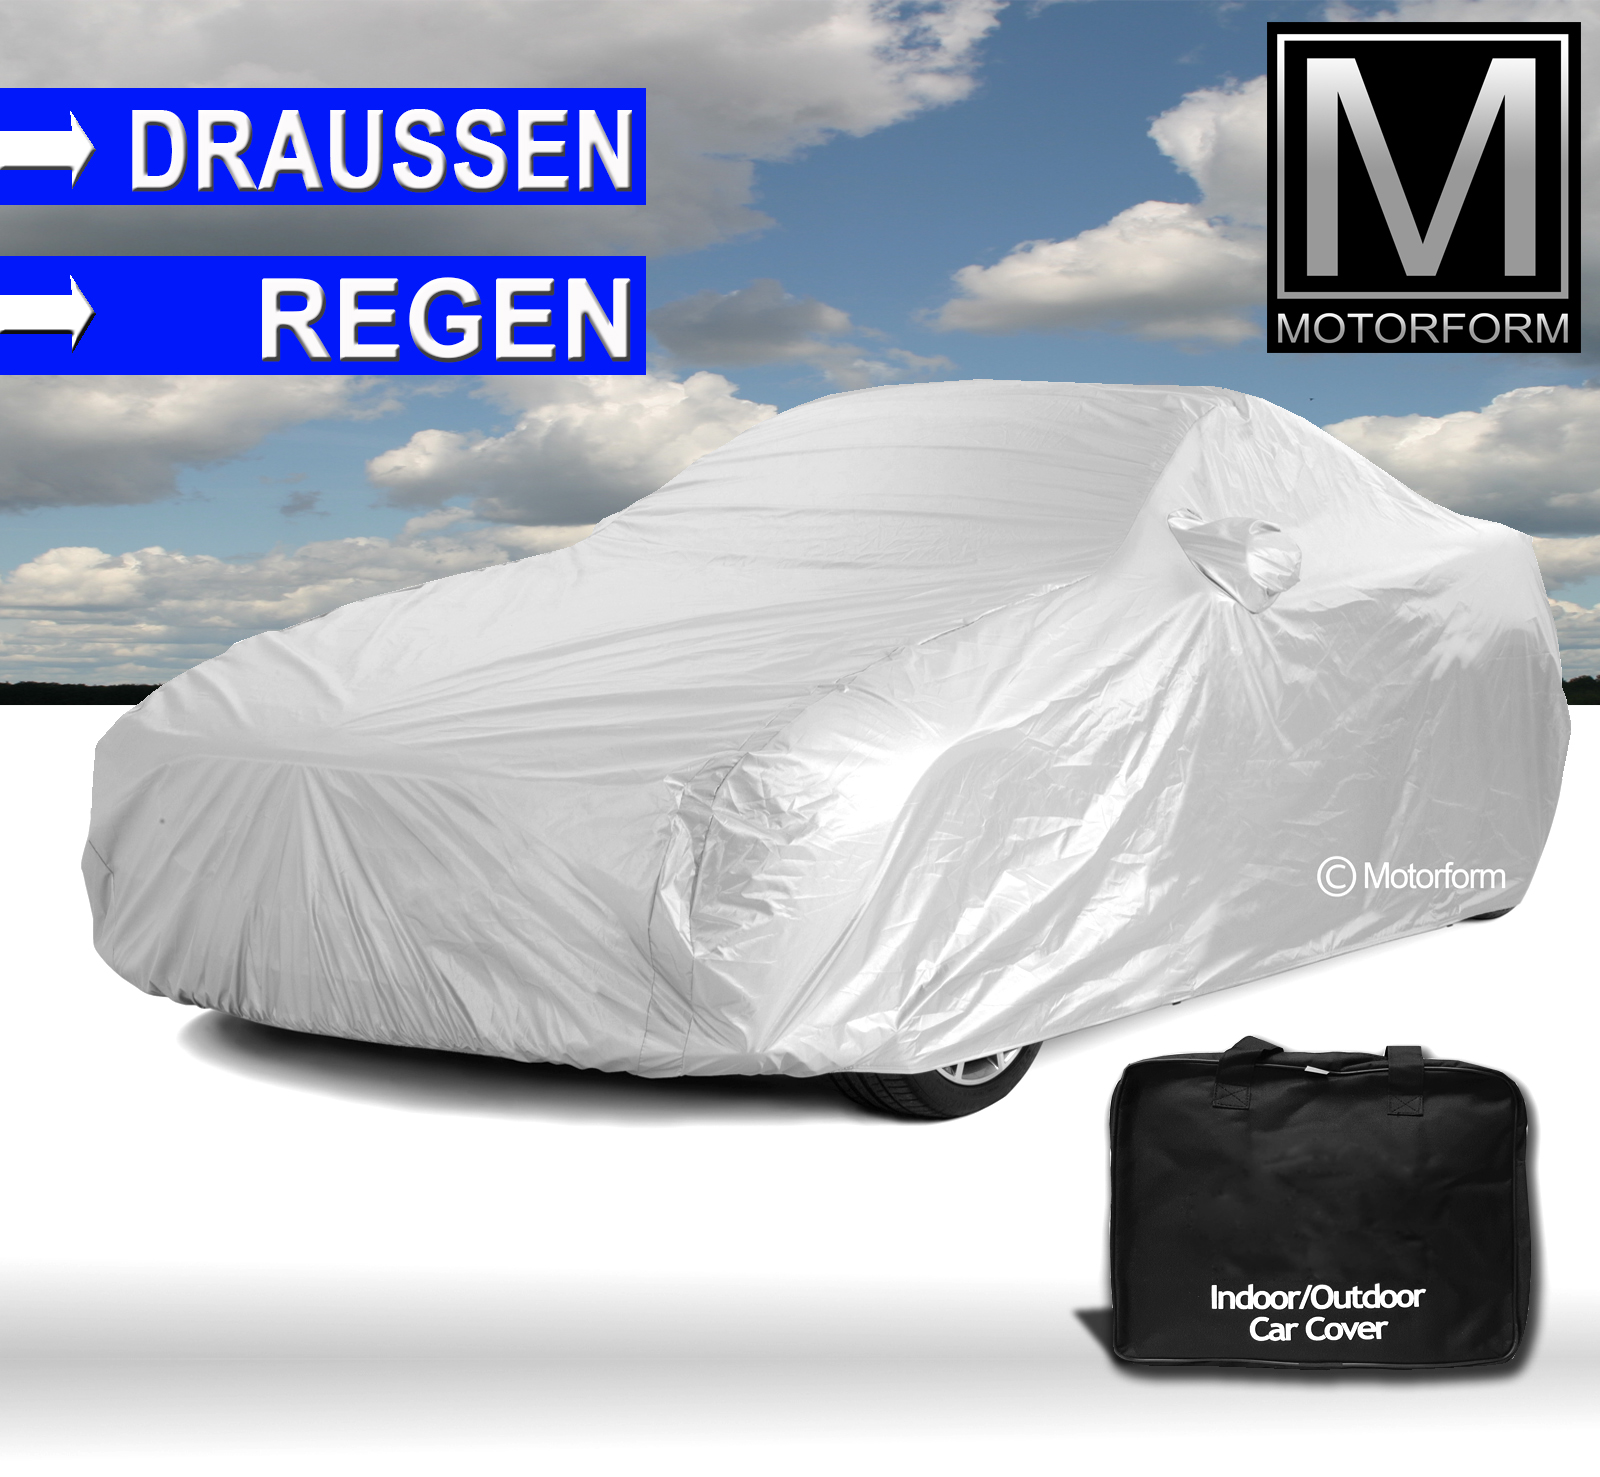 Voyager Outdoor Car Cover for Opel Calibra